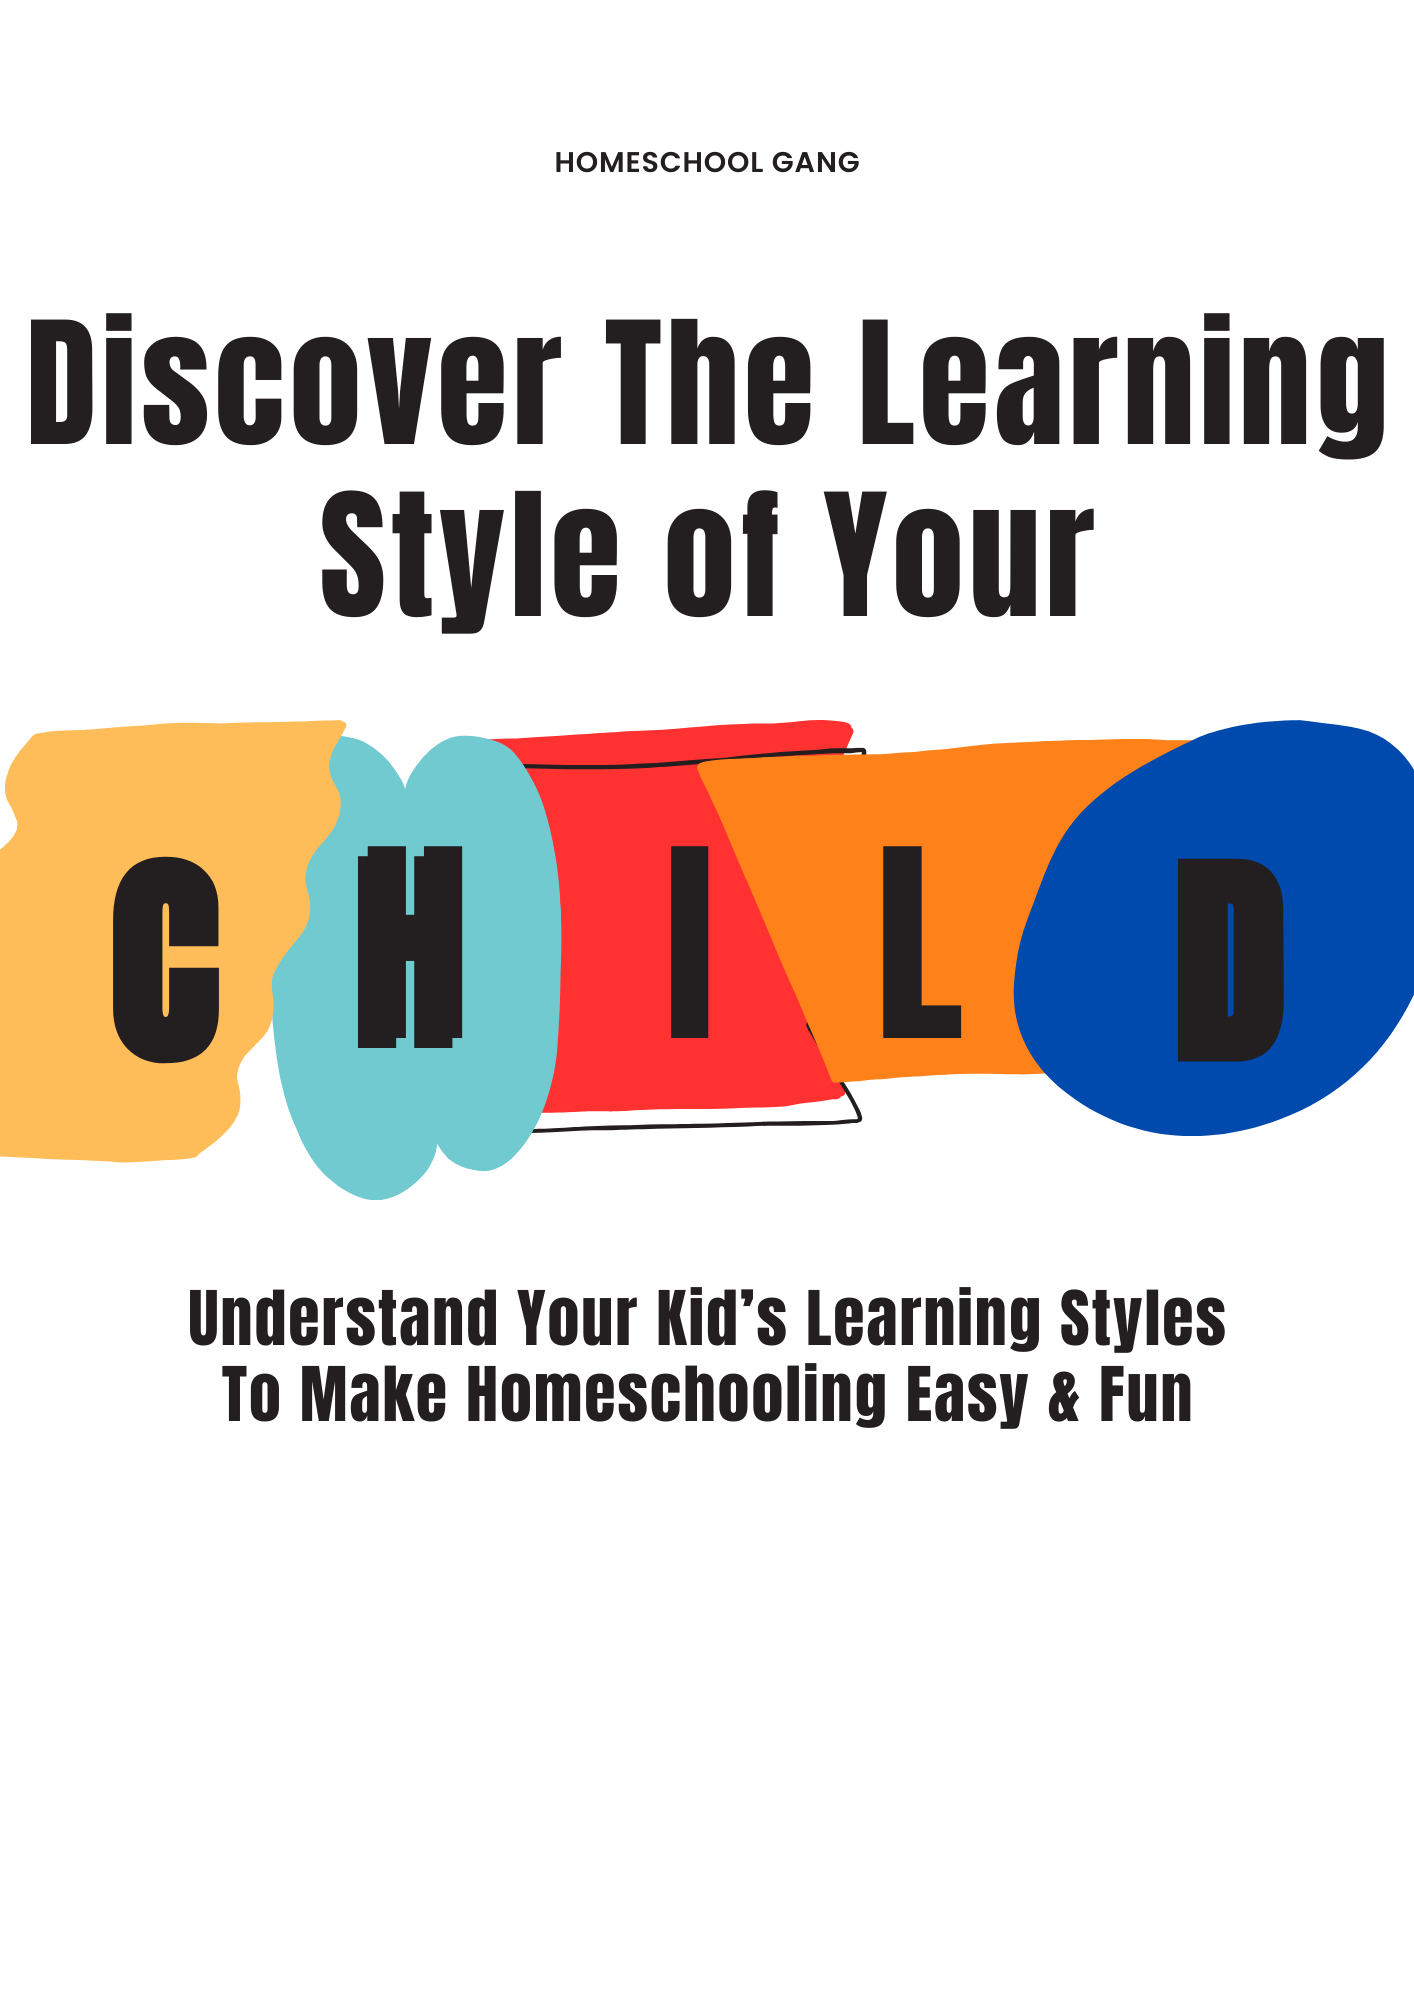 Images might include cover art of the eBook, possibly depicting an illustration of a parent teaching a child, or icons representing different learning styles.